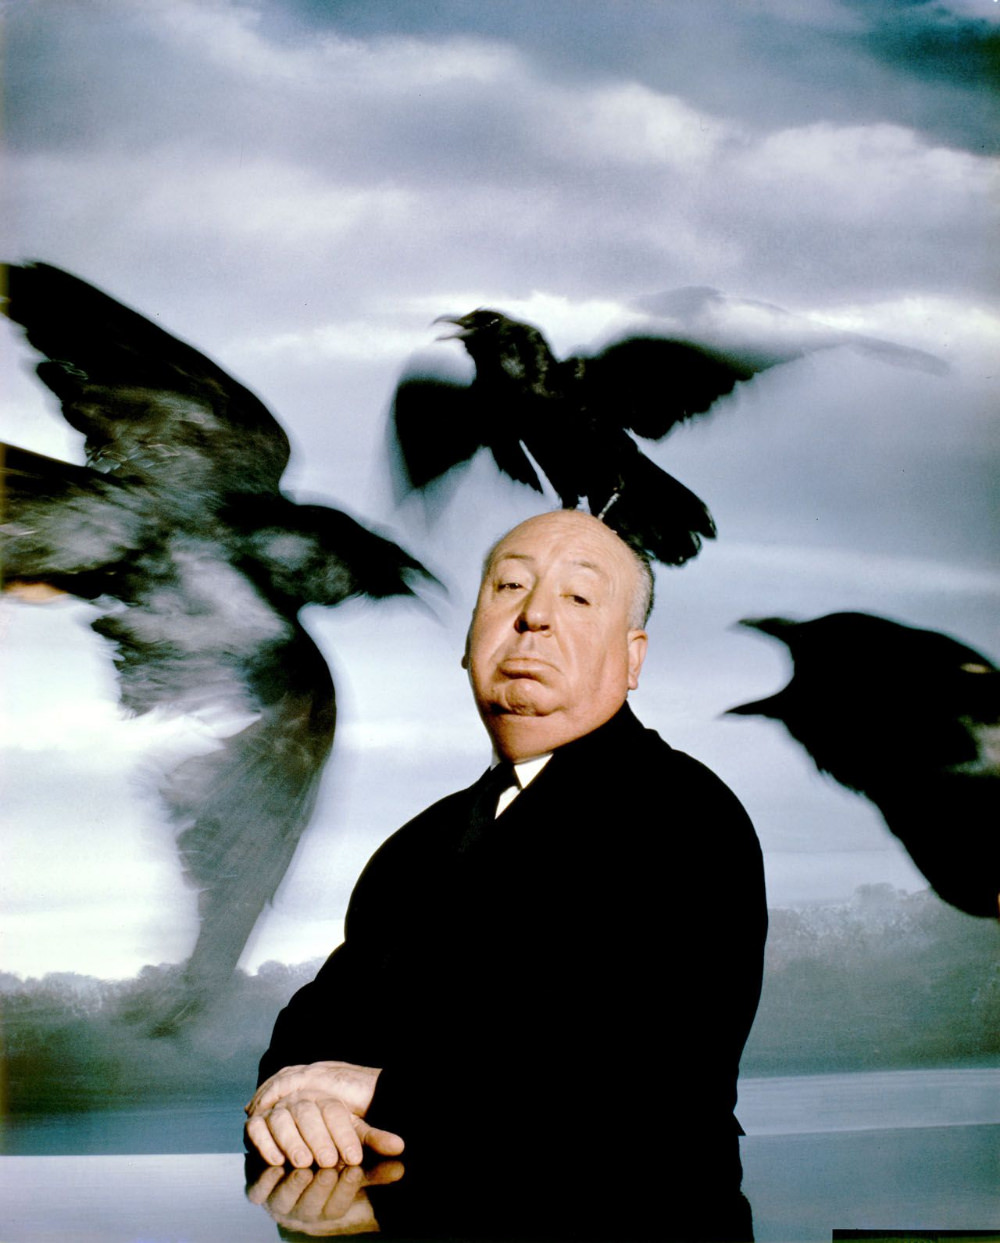 Stunning Stills and Portraits of Alfred Hitchcock Posing with Birds from the Movie 'The Birds (1963)'